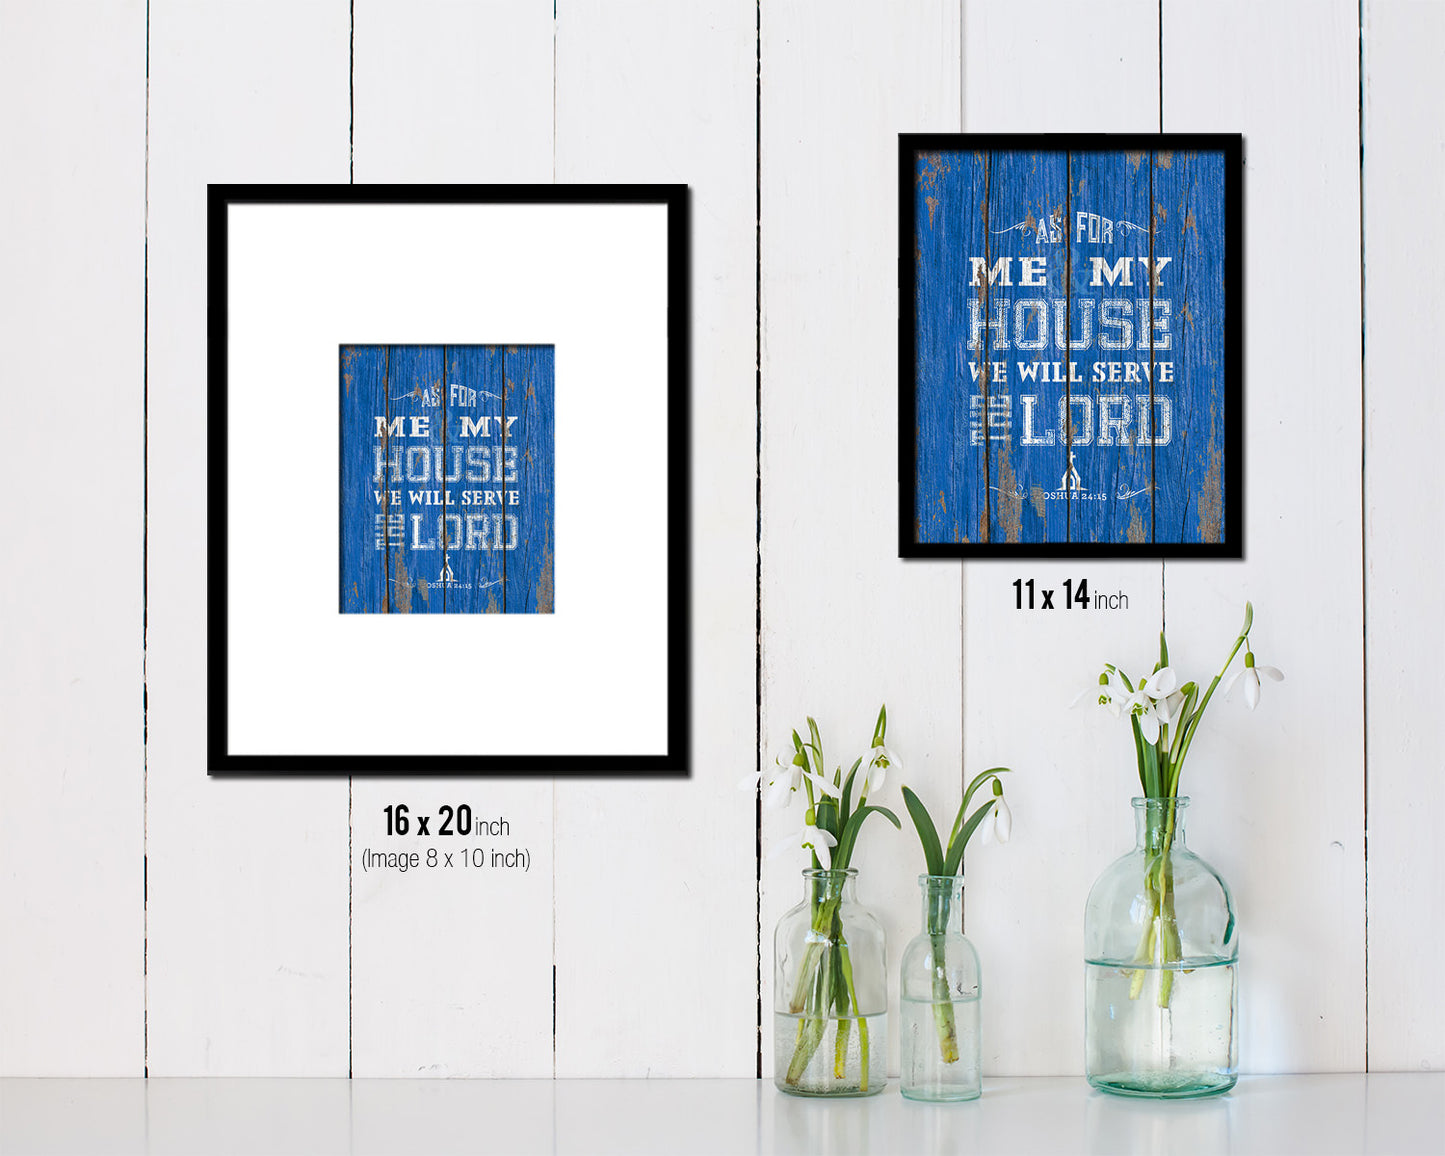 As for me we will serve the Lord, Joshua 24:15 Quote Framed Print Home Decor Wall Art Gifts